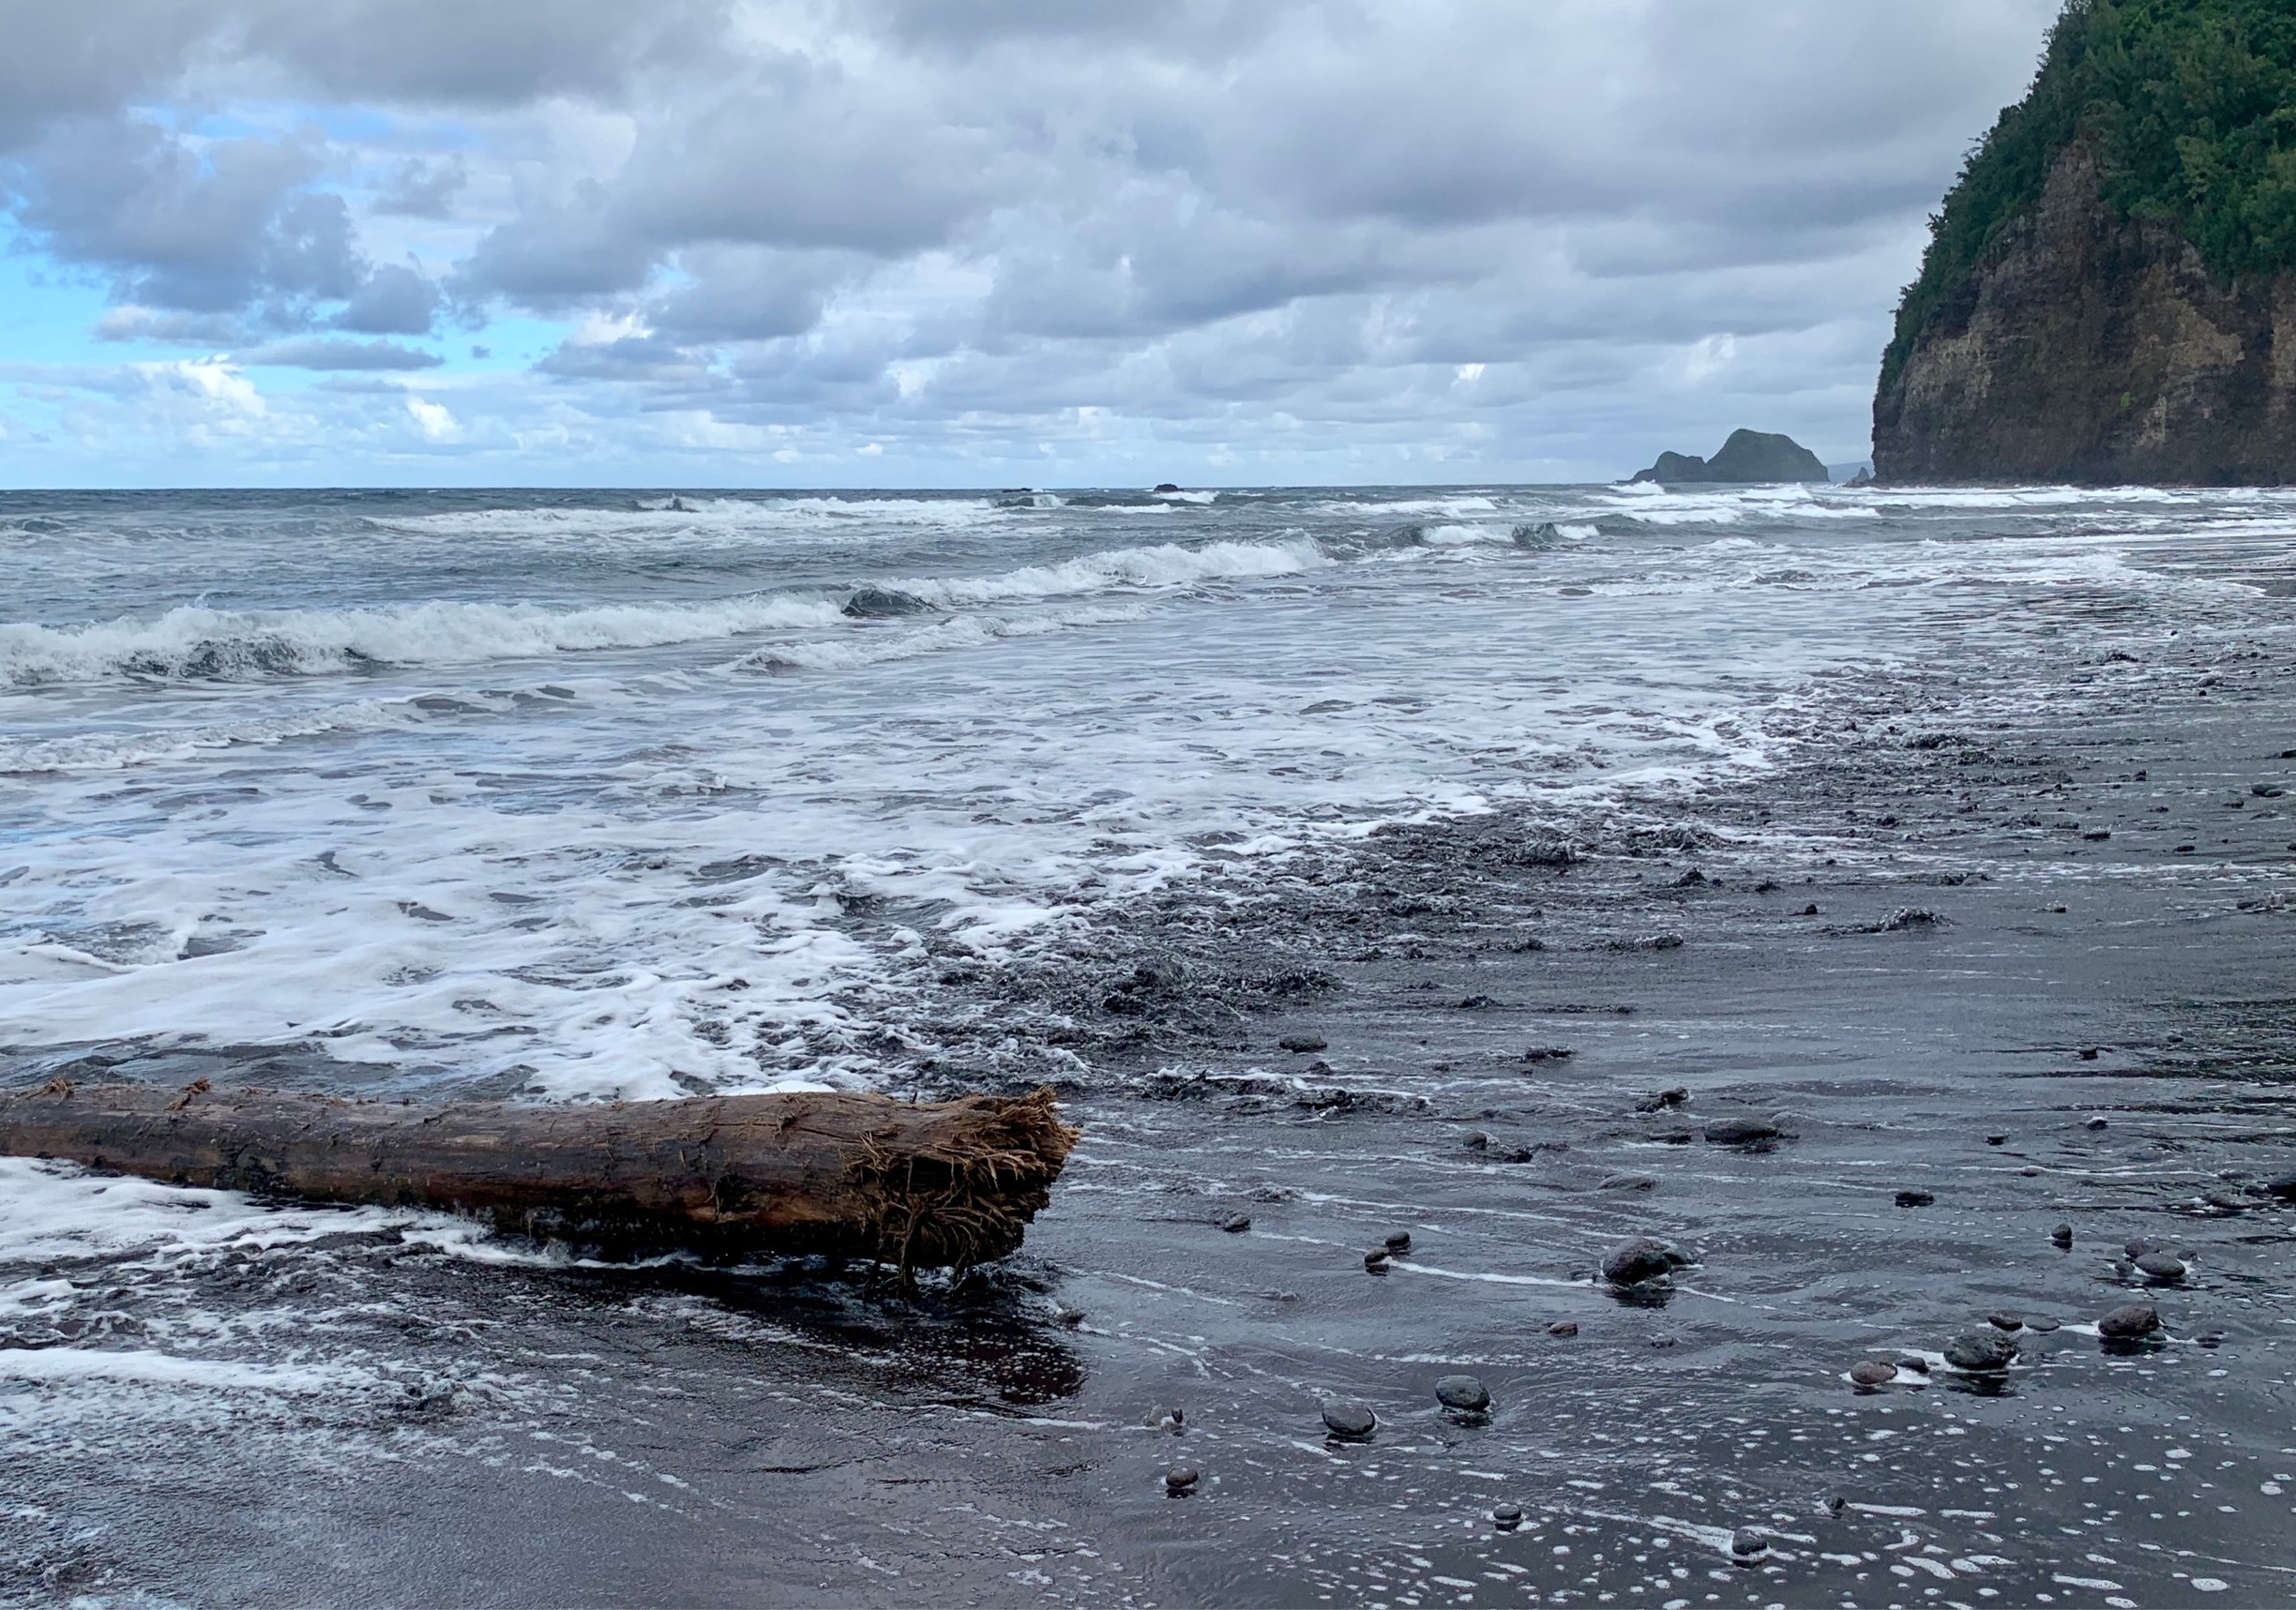 Beautiful black sand beach at the end of the Pololu Valley trail. There’s a slippery walk down to the valley from the overlook area... maybe 3/4 of a mile. Nice views on the way down, ending where the river meets the sea. 
#BeachBound #Hiking #BigIsland #Hawaii #Blue